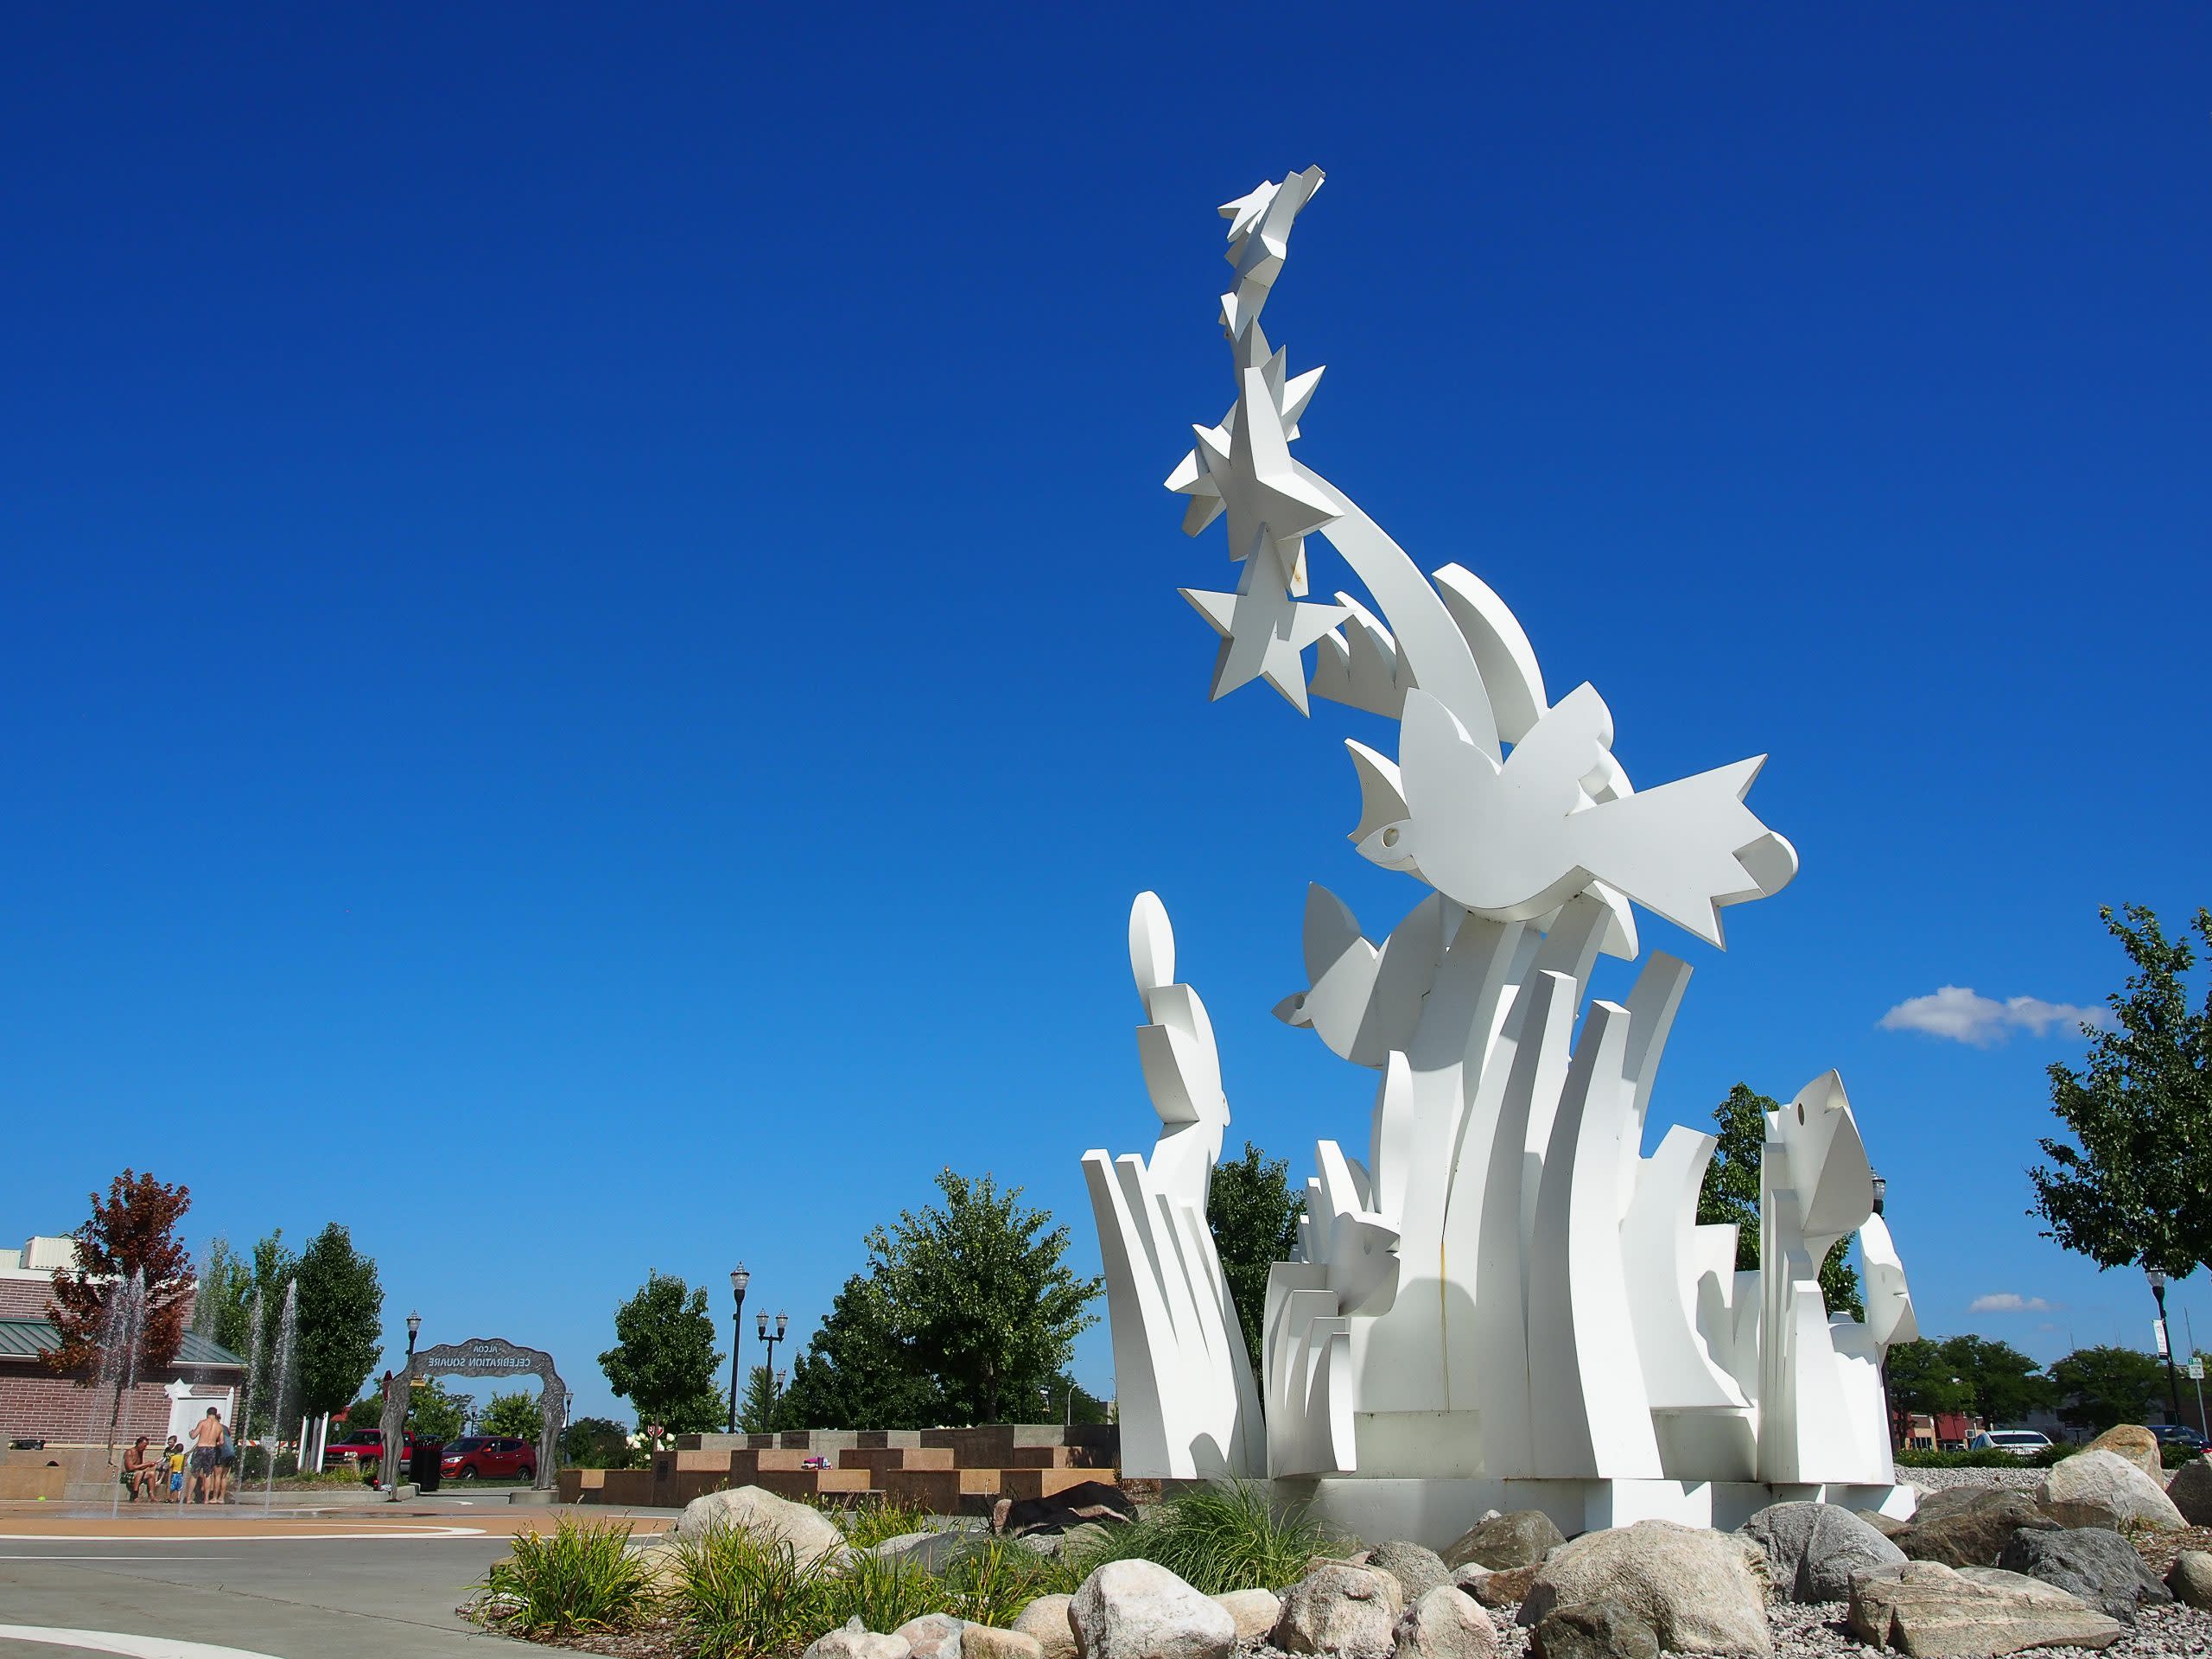 white sclulpture with stars and bird shapes is set against bright blue sky